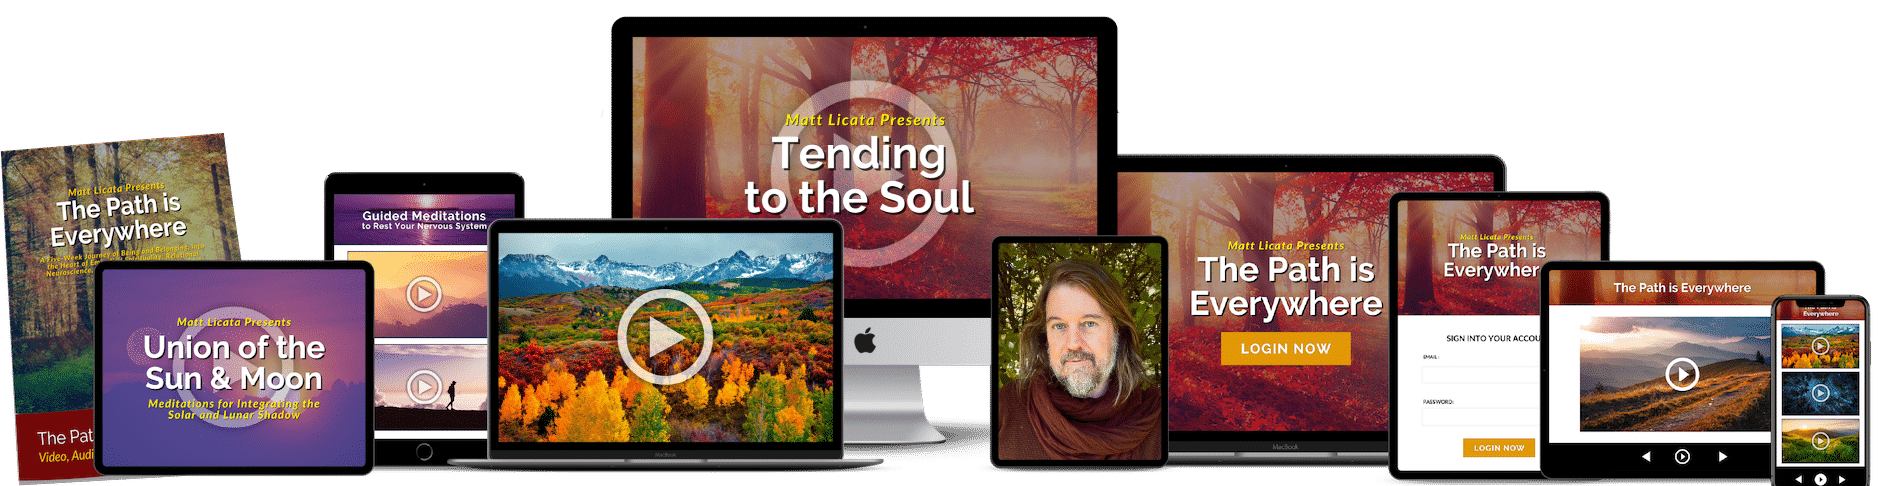 Tending to the Soul